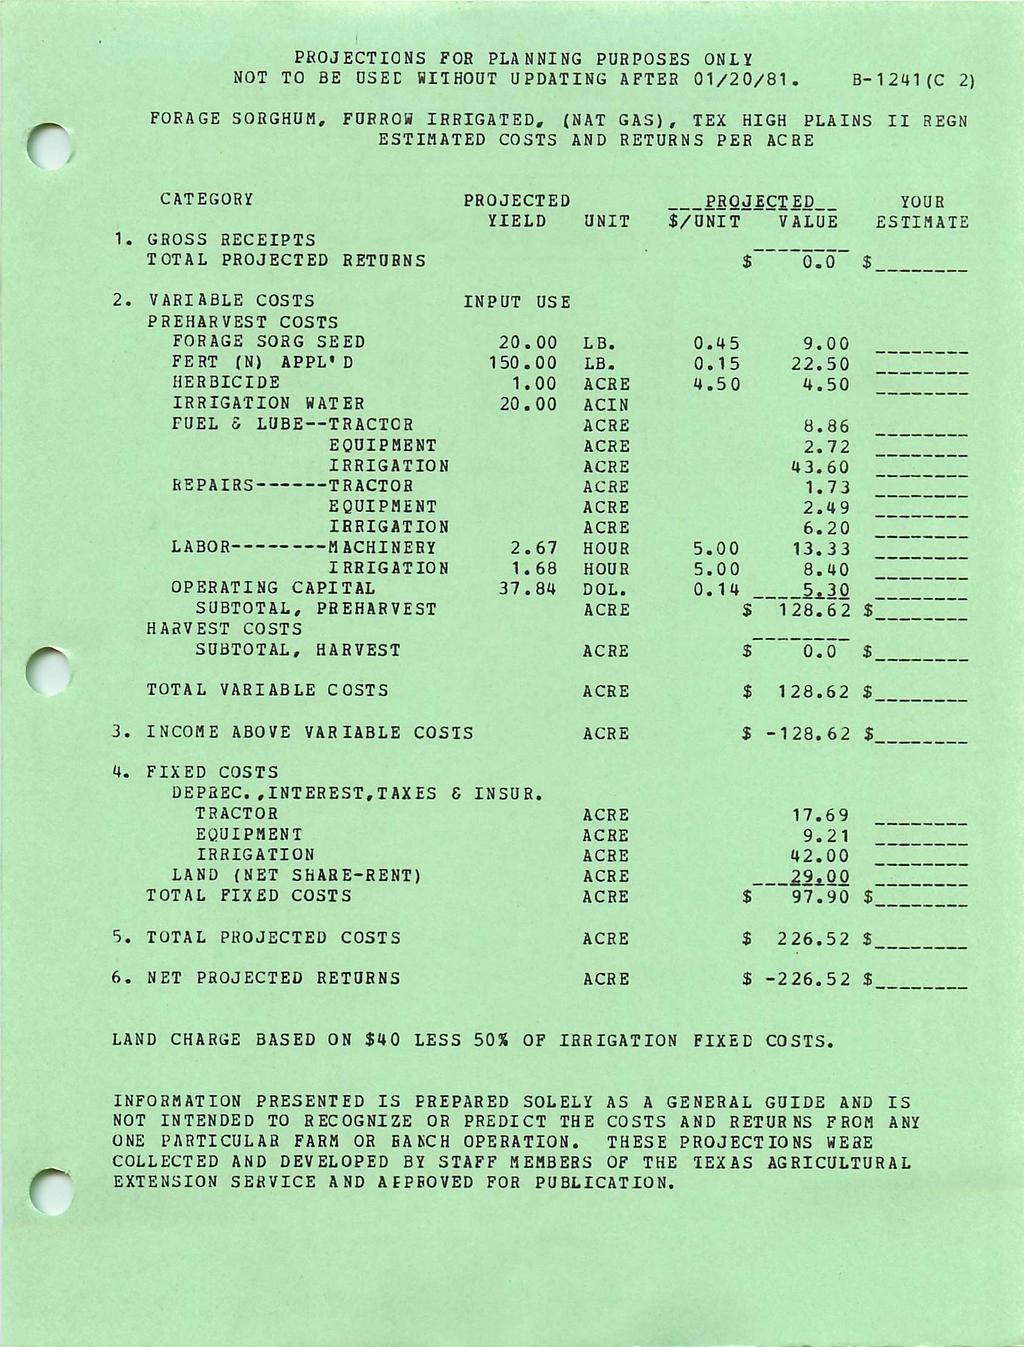 PROJECTIONS FOR PLANNING PURPOSES ONLY NOT TO BE USED WITHOUT UPDATING AFTER 01/20/81 B 1 241 (C 2) FORAGE SORGHUM, FURROW IRRIGATED, (NAT GAS), TEX HIGH PLAINS II REGN ESTIMATED COSTS AND RETURNS